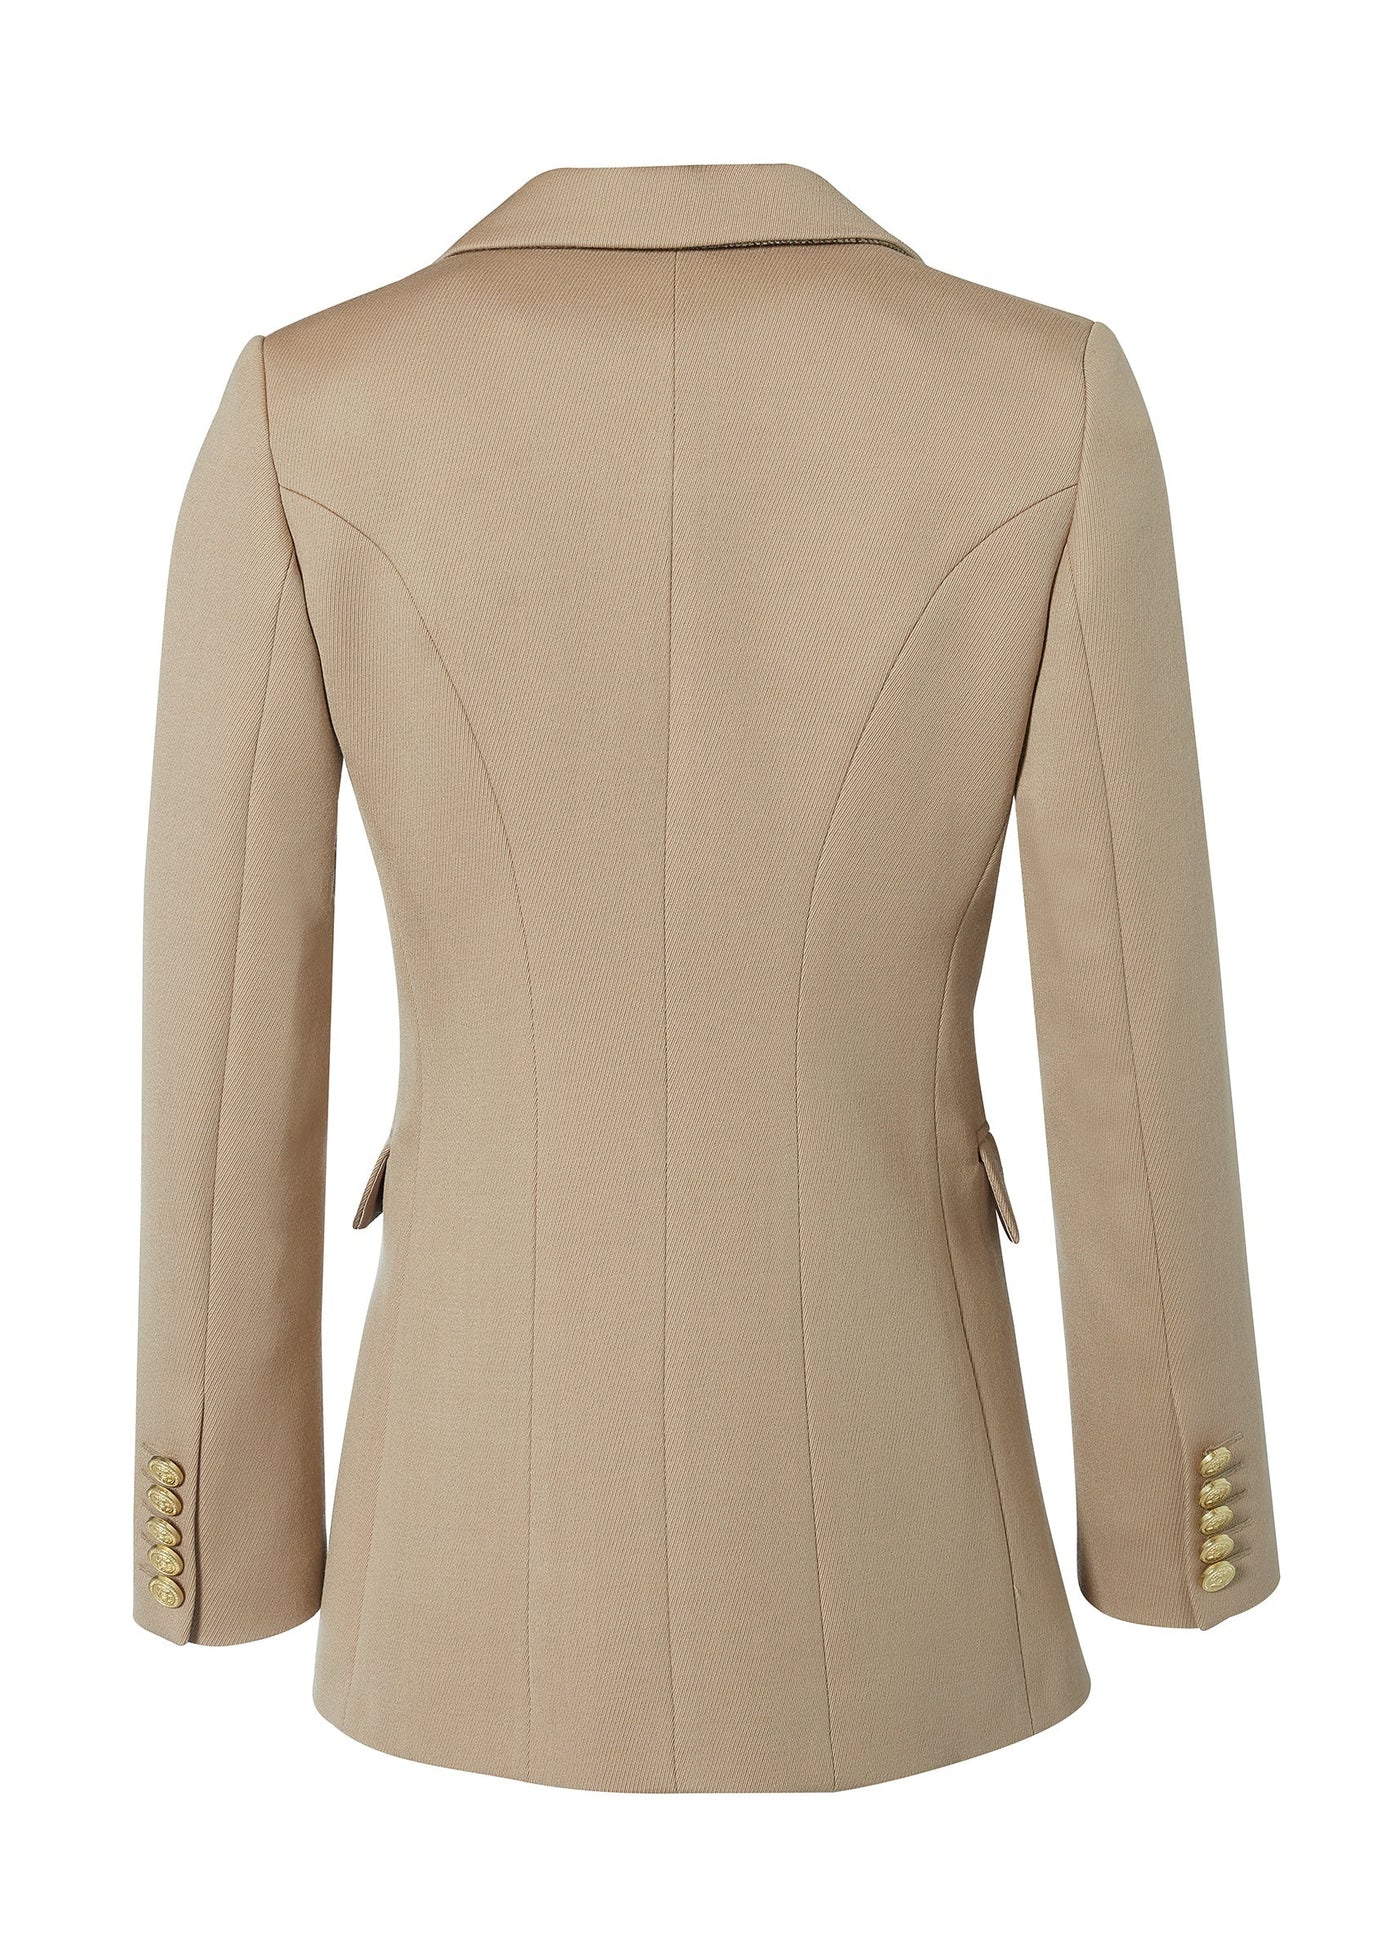 Holland Cooper Double Breasted Ladies Blazer in Camel Twill Back